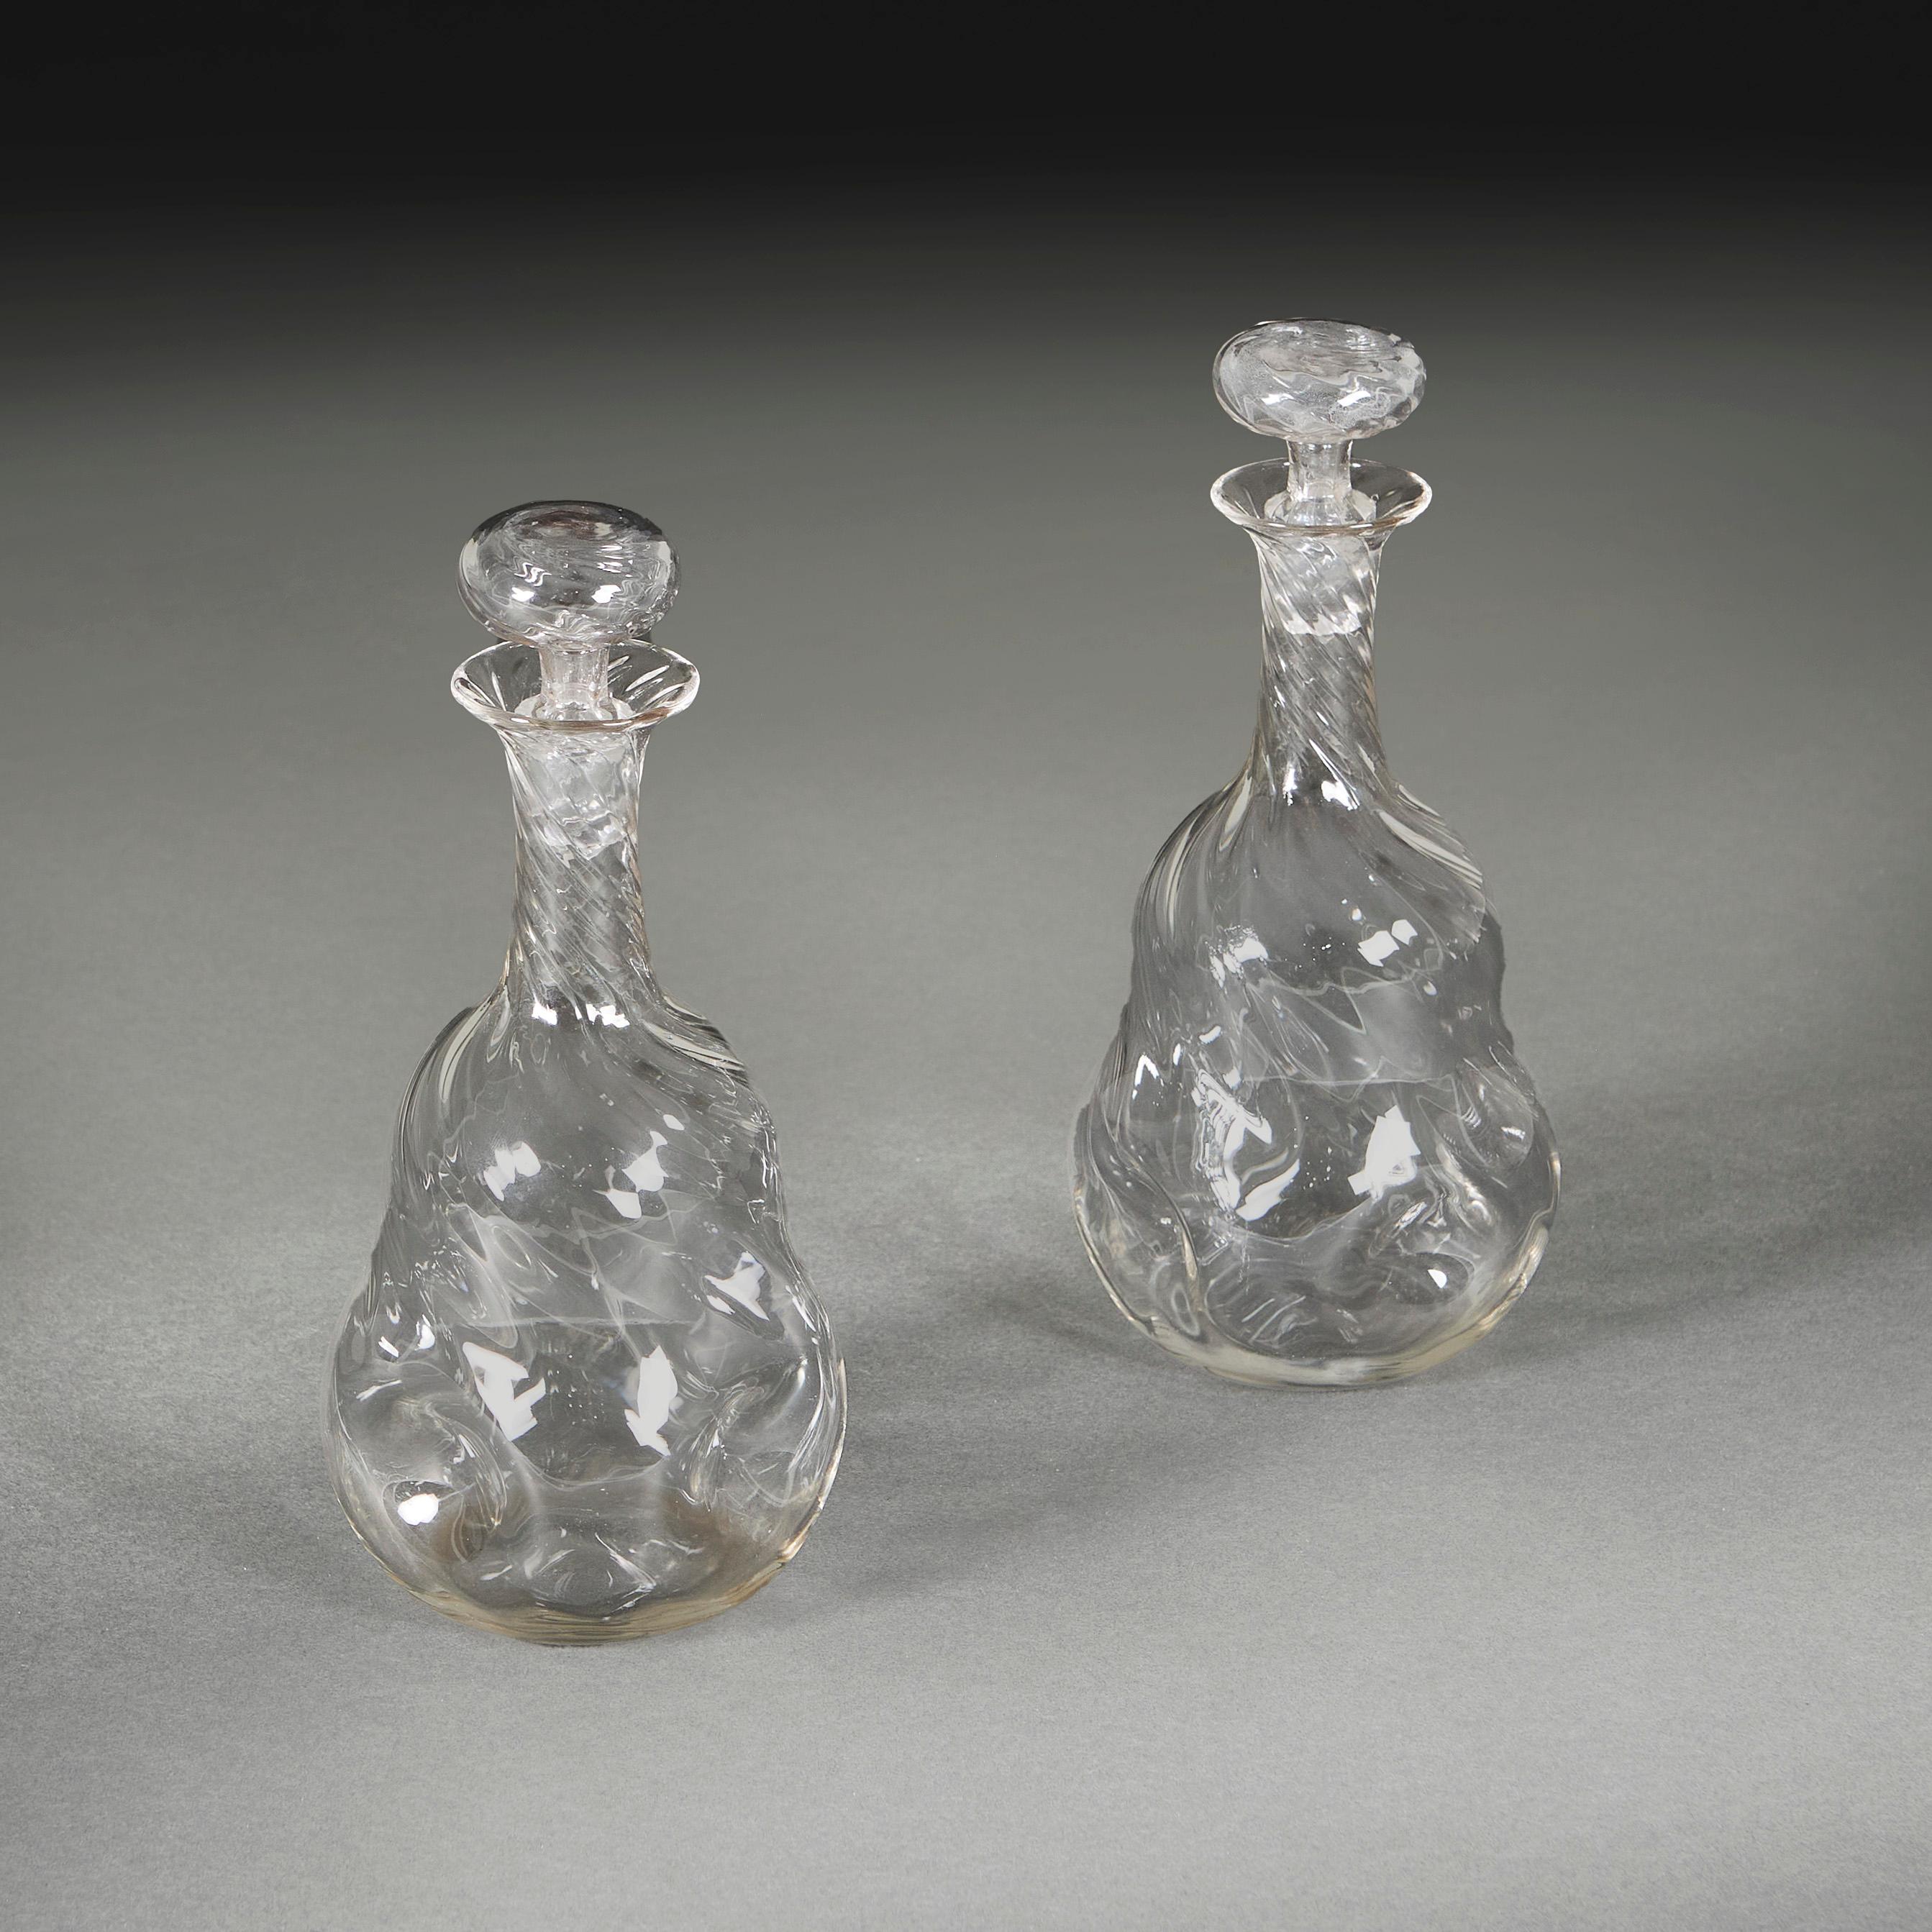 An unusual pair of Arts and Crafts decanters of double gourd dimpled and wrythen mallet form, with hollow bun stoppers.

England, circa 1890
Height 26.00cm
Width  10.00cm